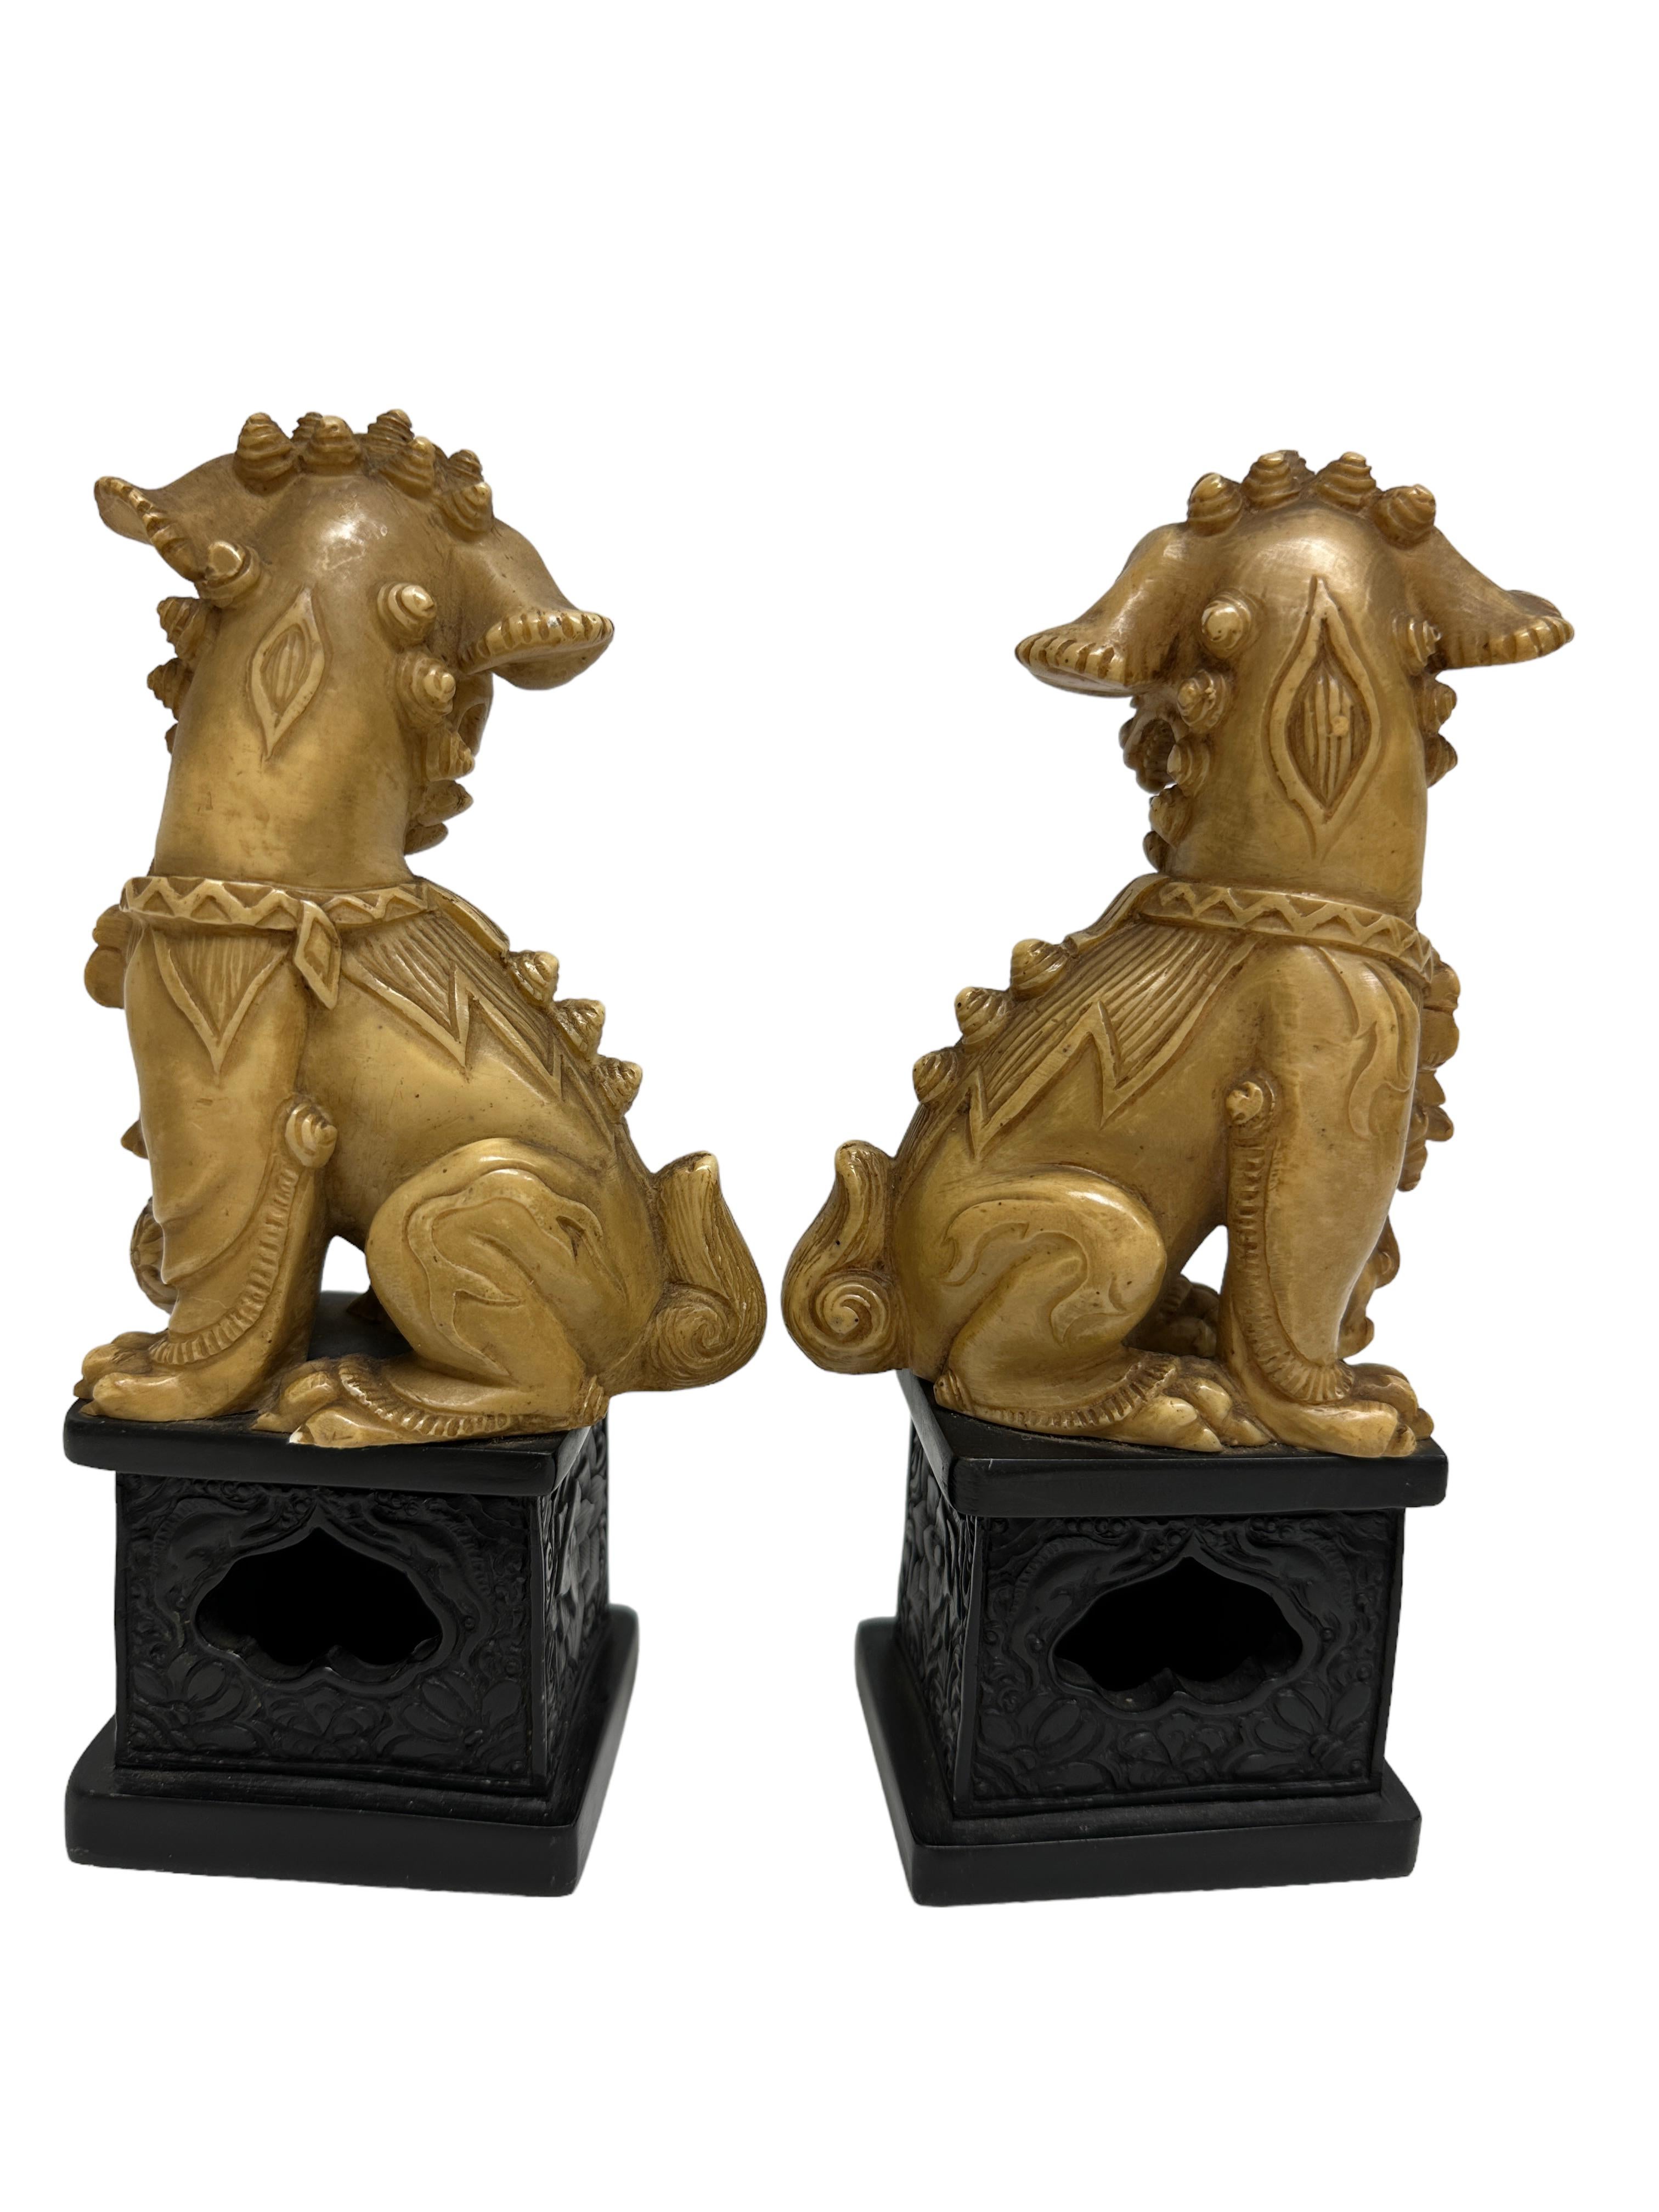 Hand-Carved Unique Pair of Decorative Foo Dogs Temple Lion Bookends Sculptures For Sale